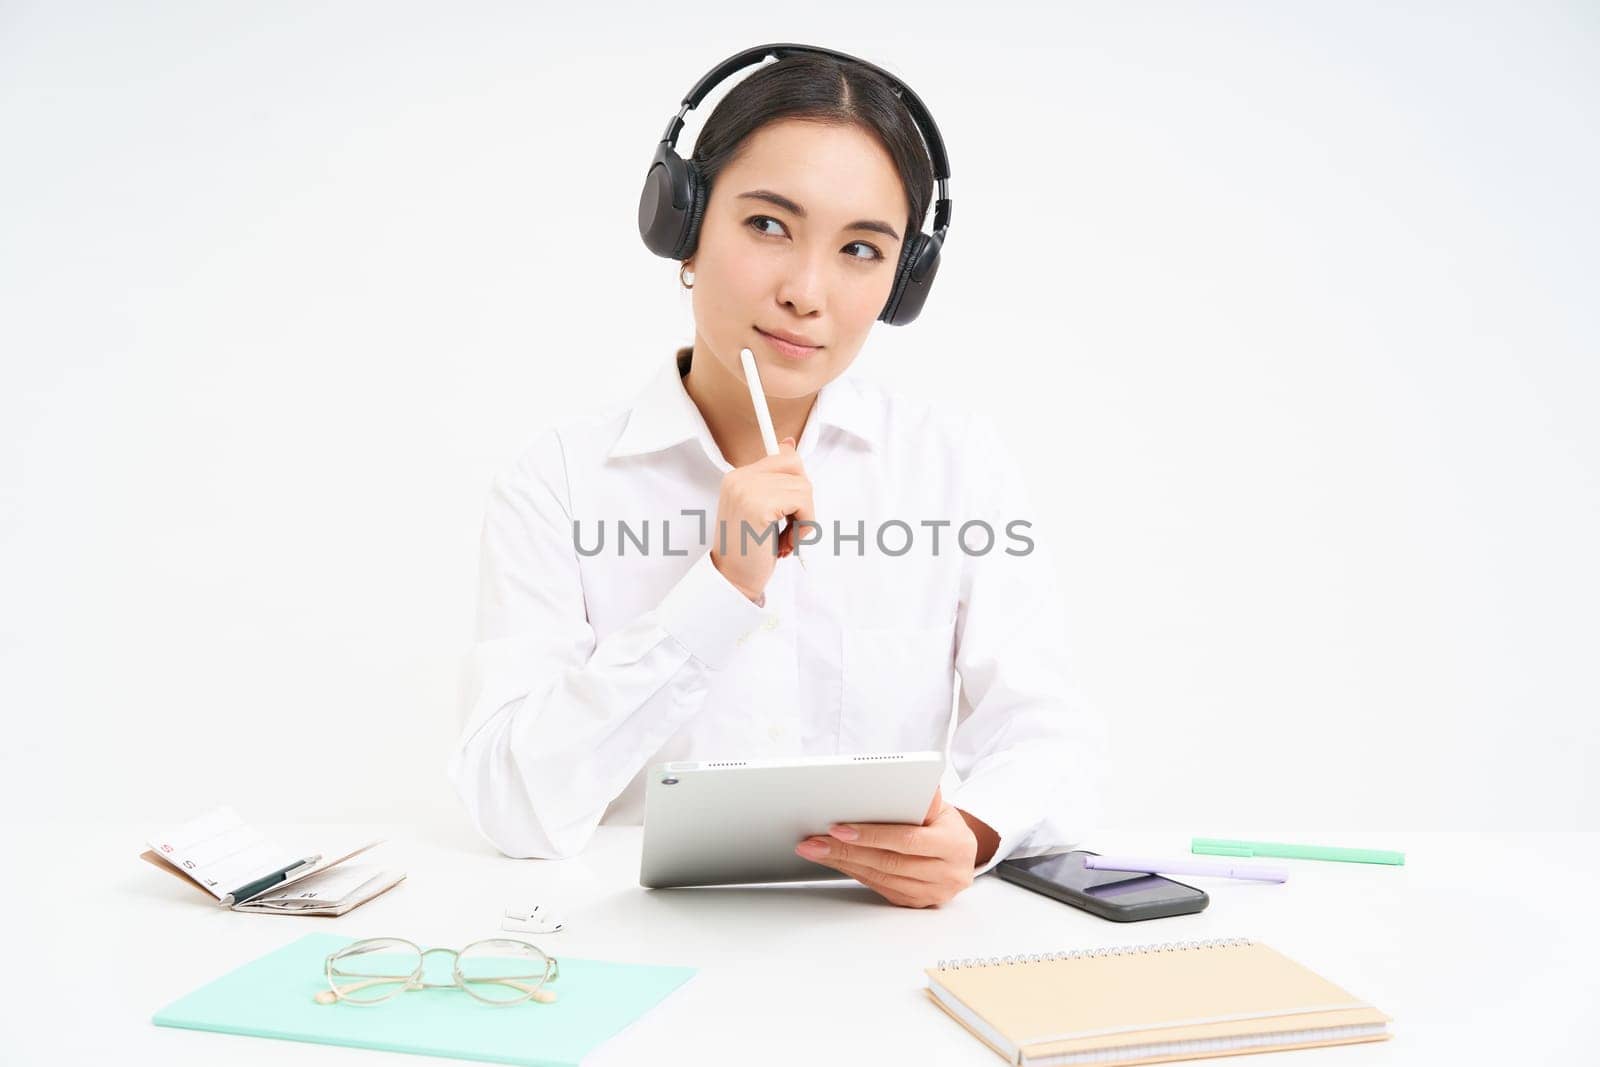 Portrait of professional woman working, listening podcast or course in headphones, holding digital tablet, sitting over white background.